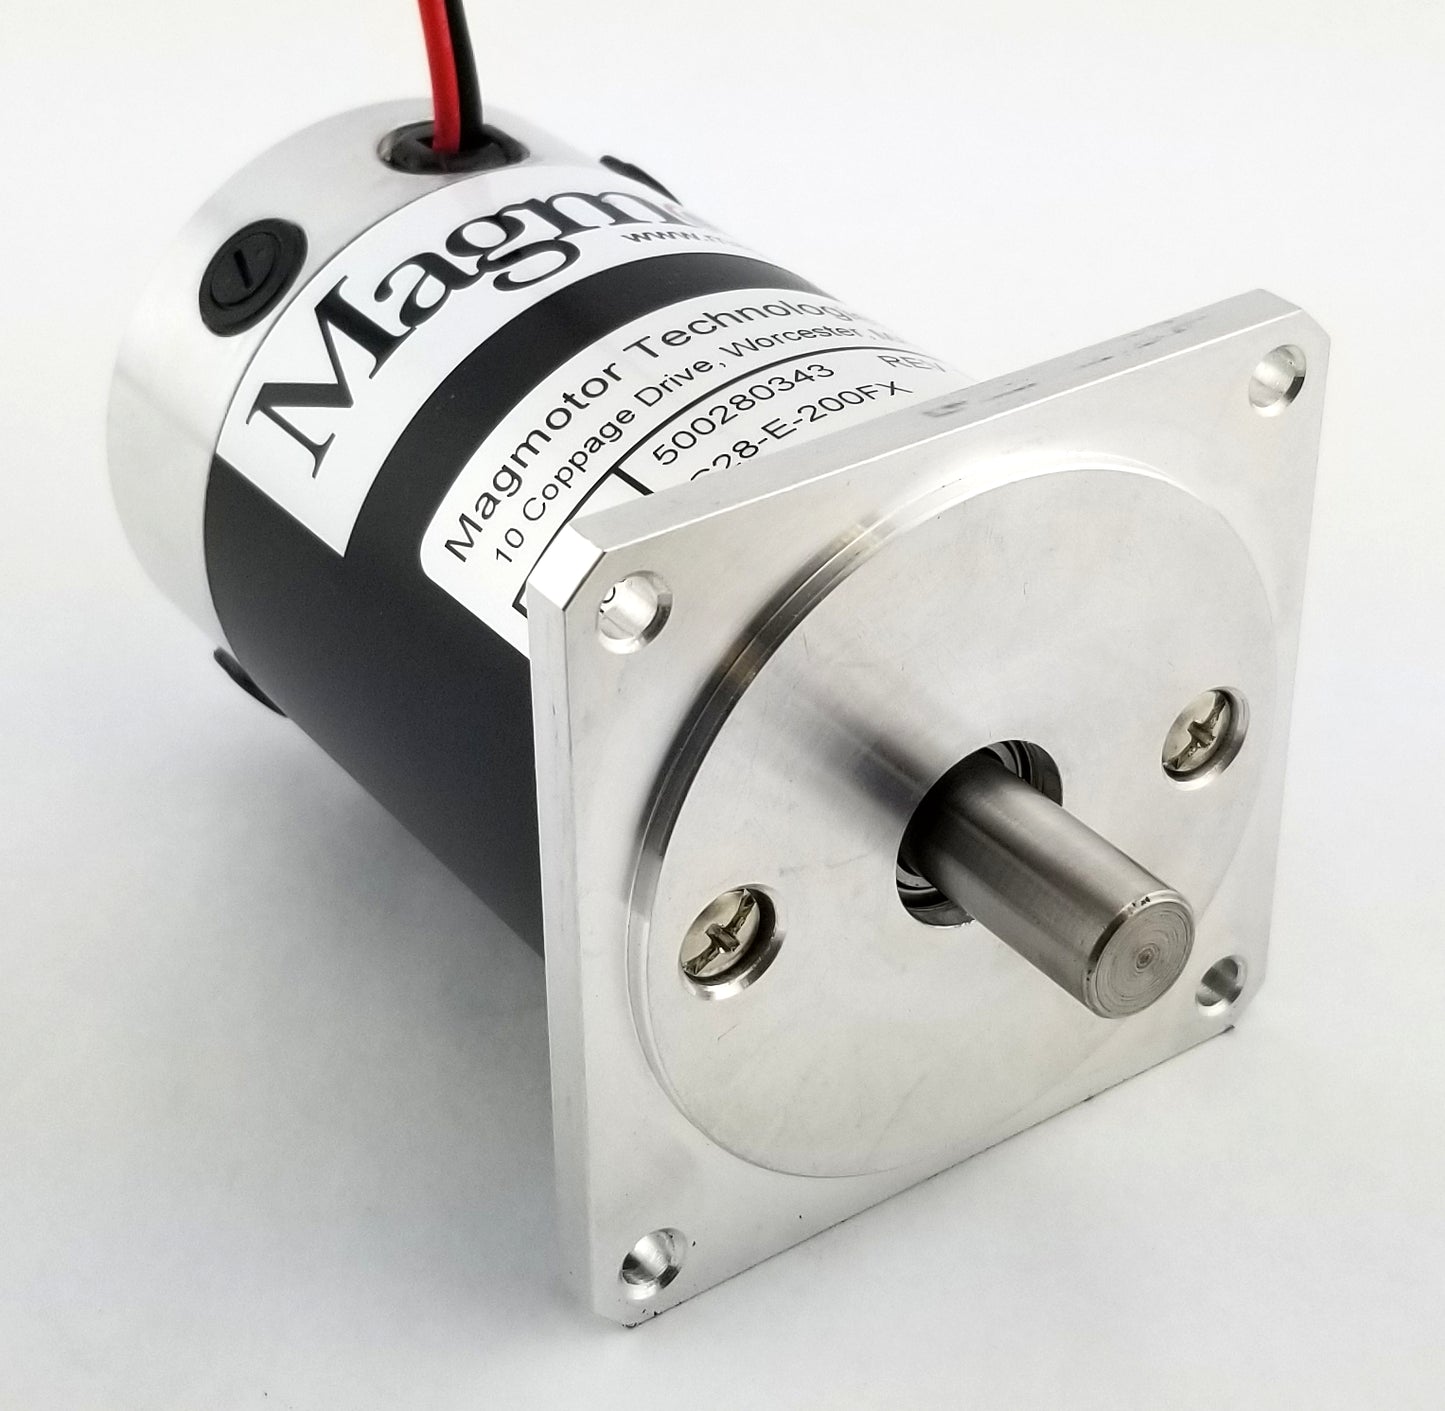 Magmotor S28-E-200FX 12 to 30 Volt 4 Pole Brushed Motor 500280343 Front View